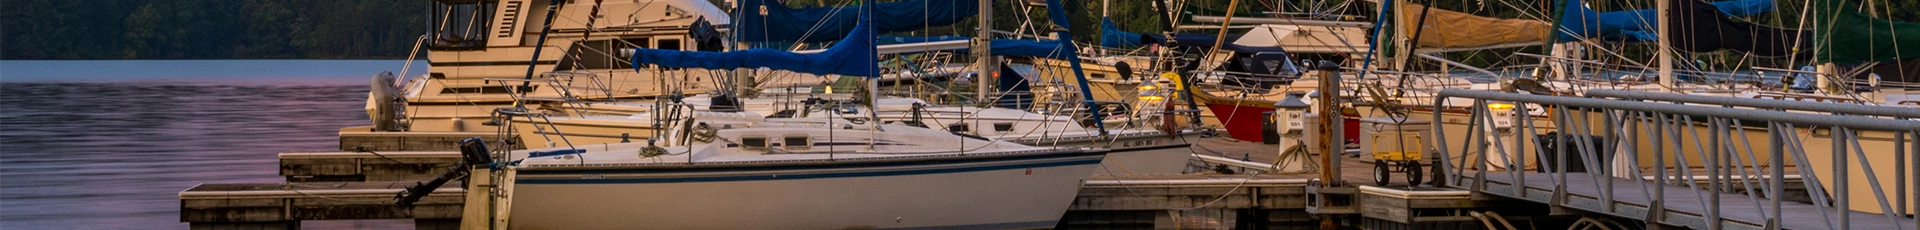 Boat Removal, Dismantle and Disposal in Parker Florida